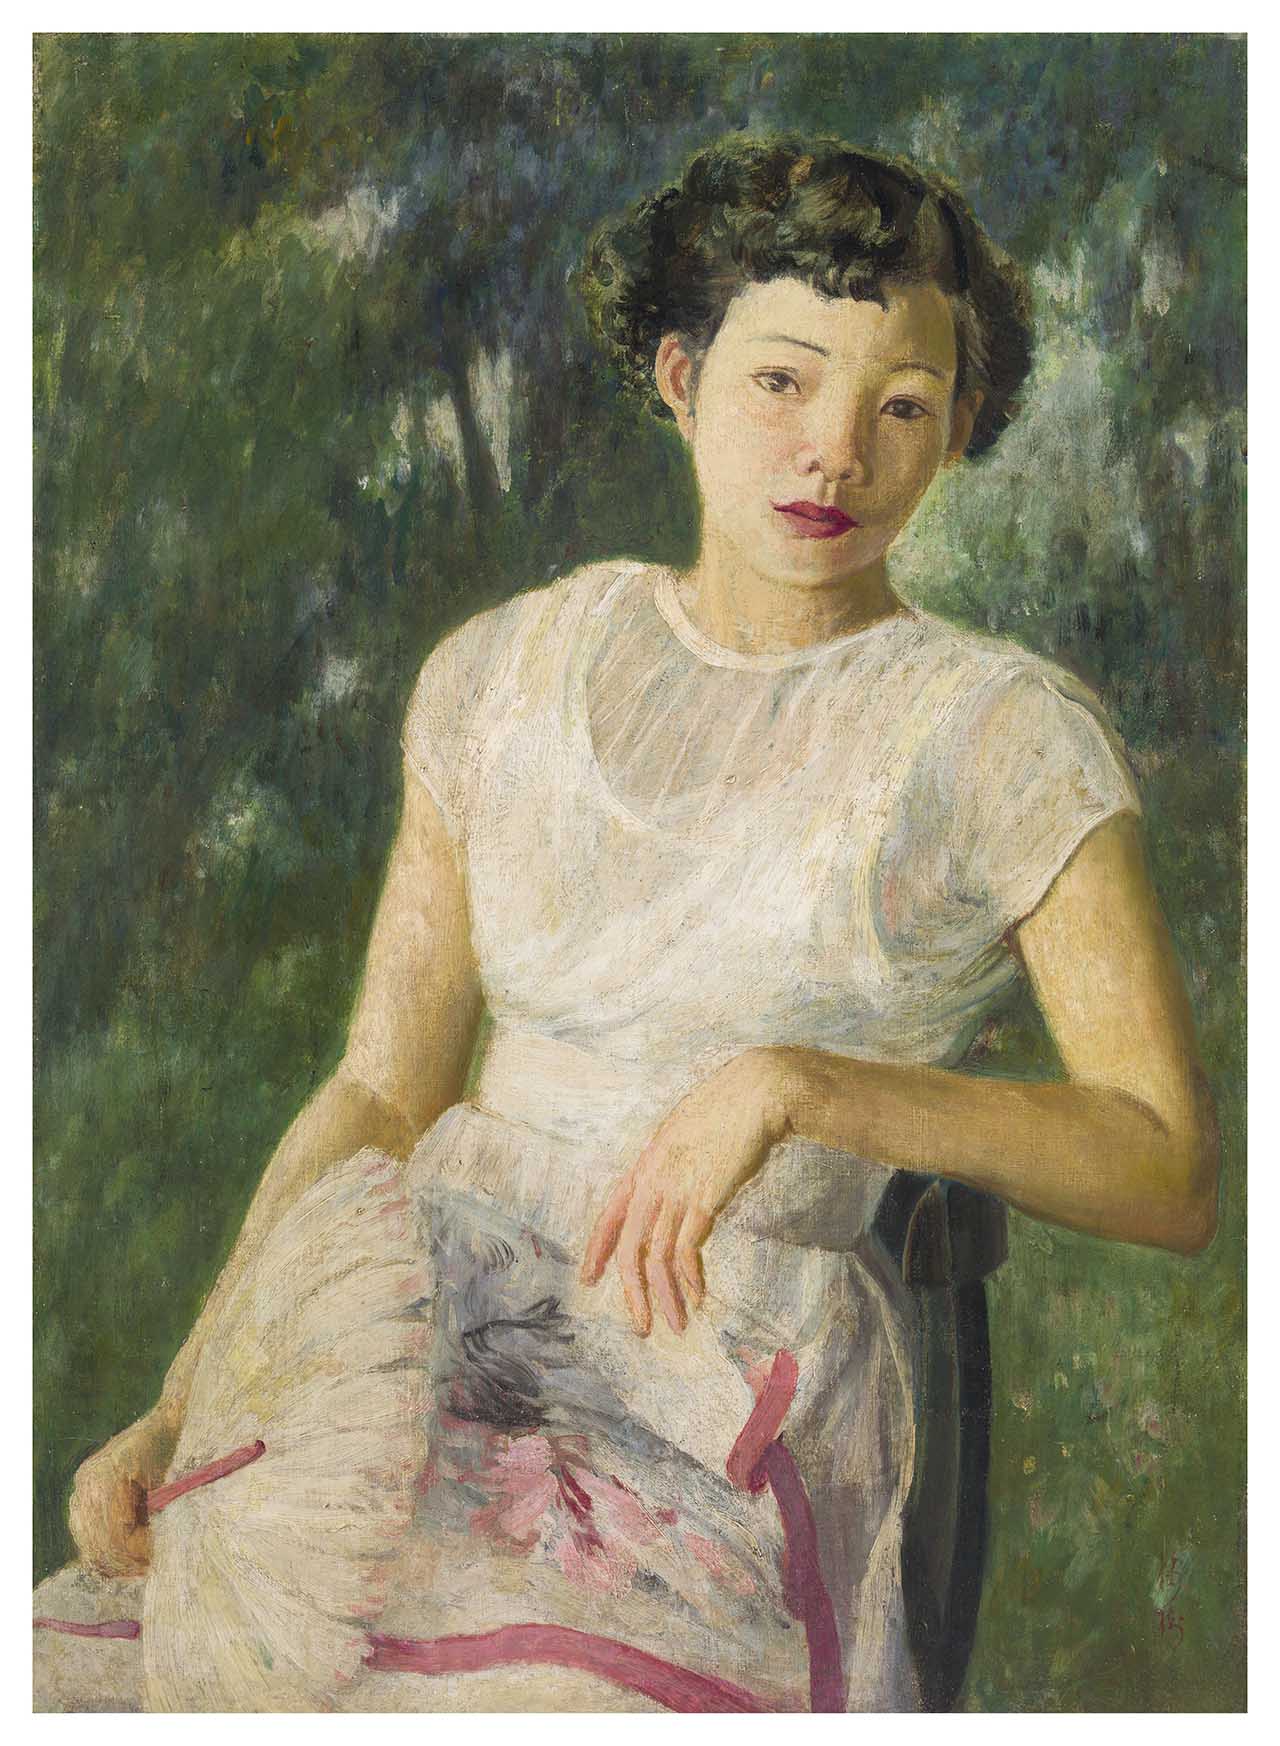 Lady in White Dress Oil on canvas 72.5x60.5cm